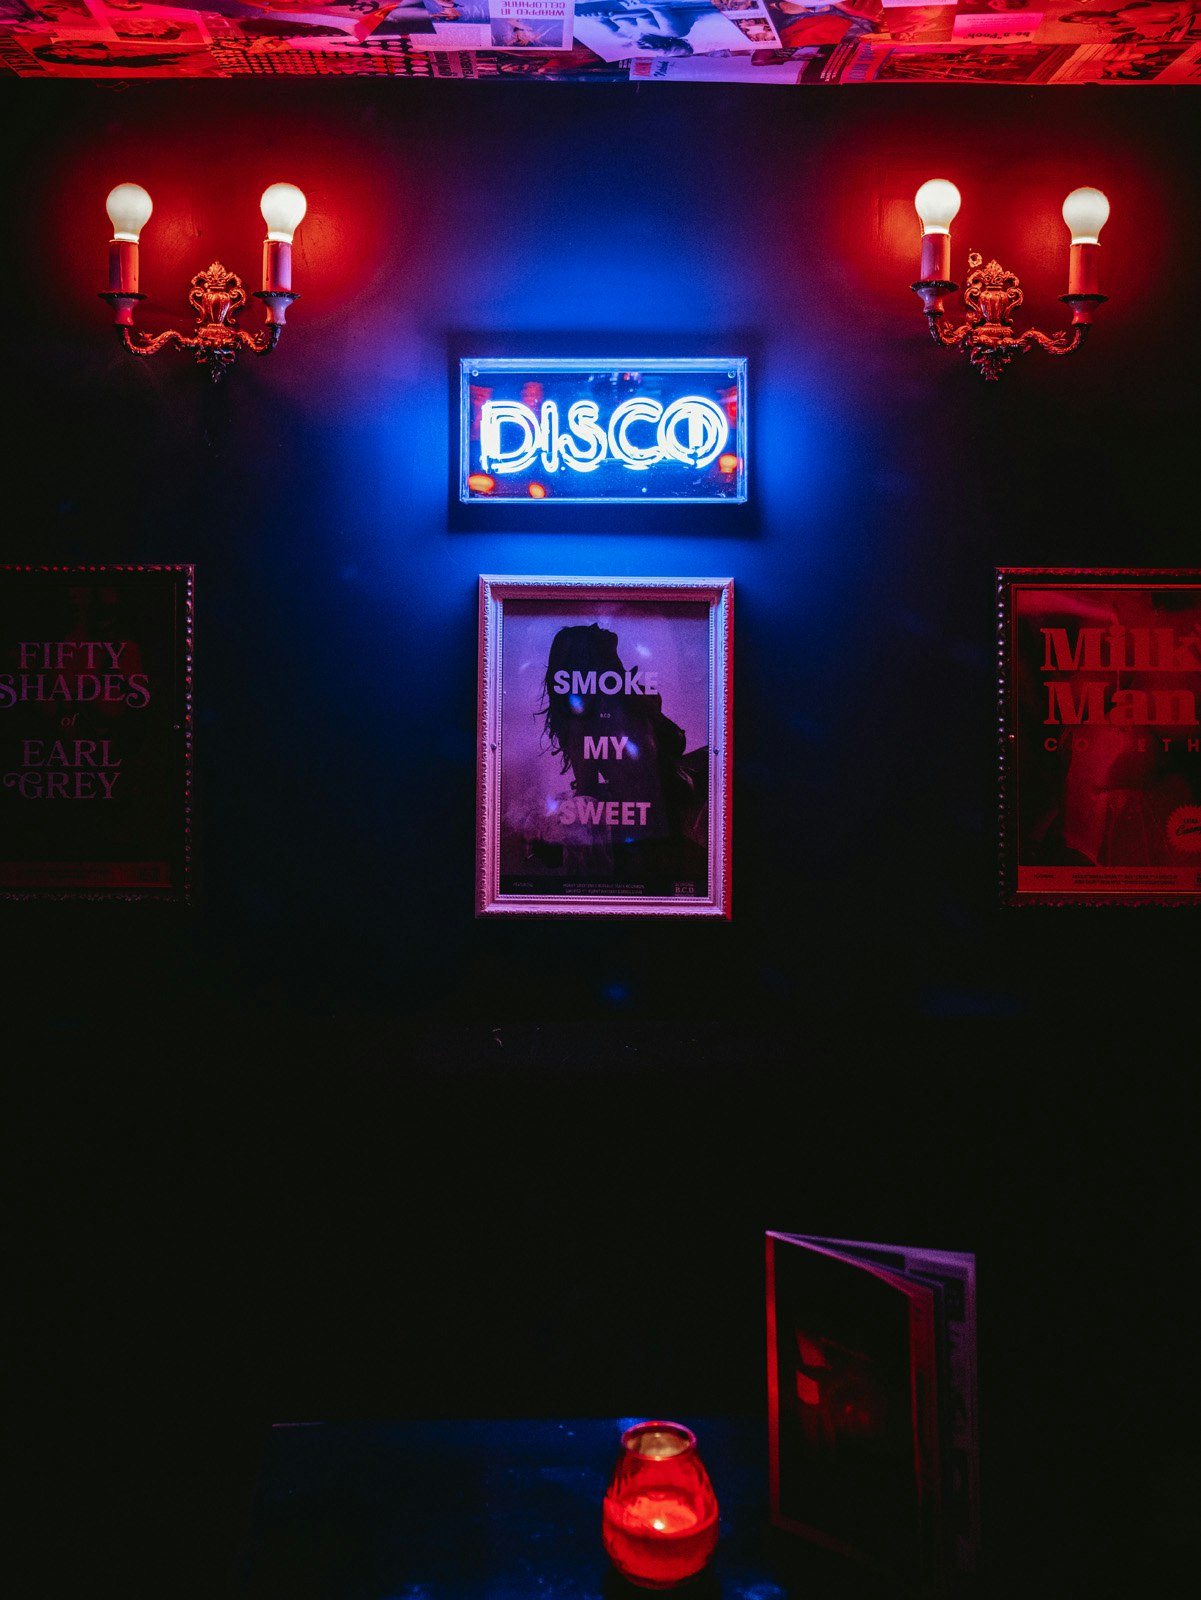 Northern Quarter Venue Hire - Behind Closed Doors - Events in Disco Room - Banner